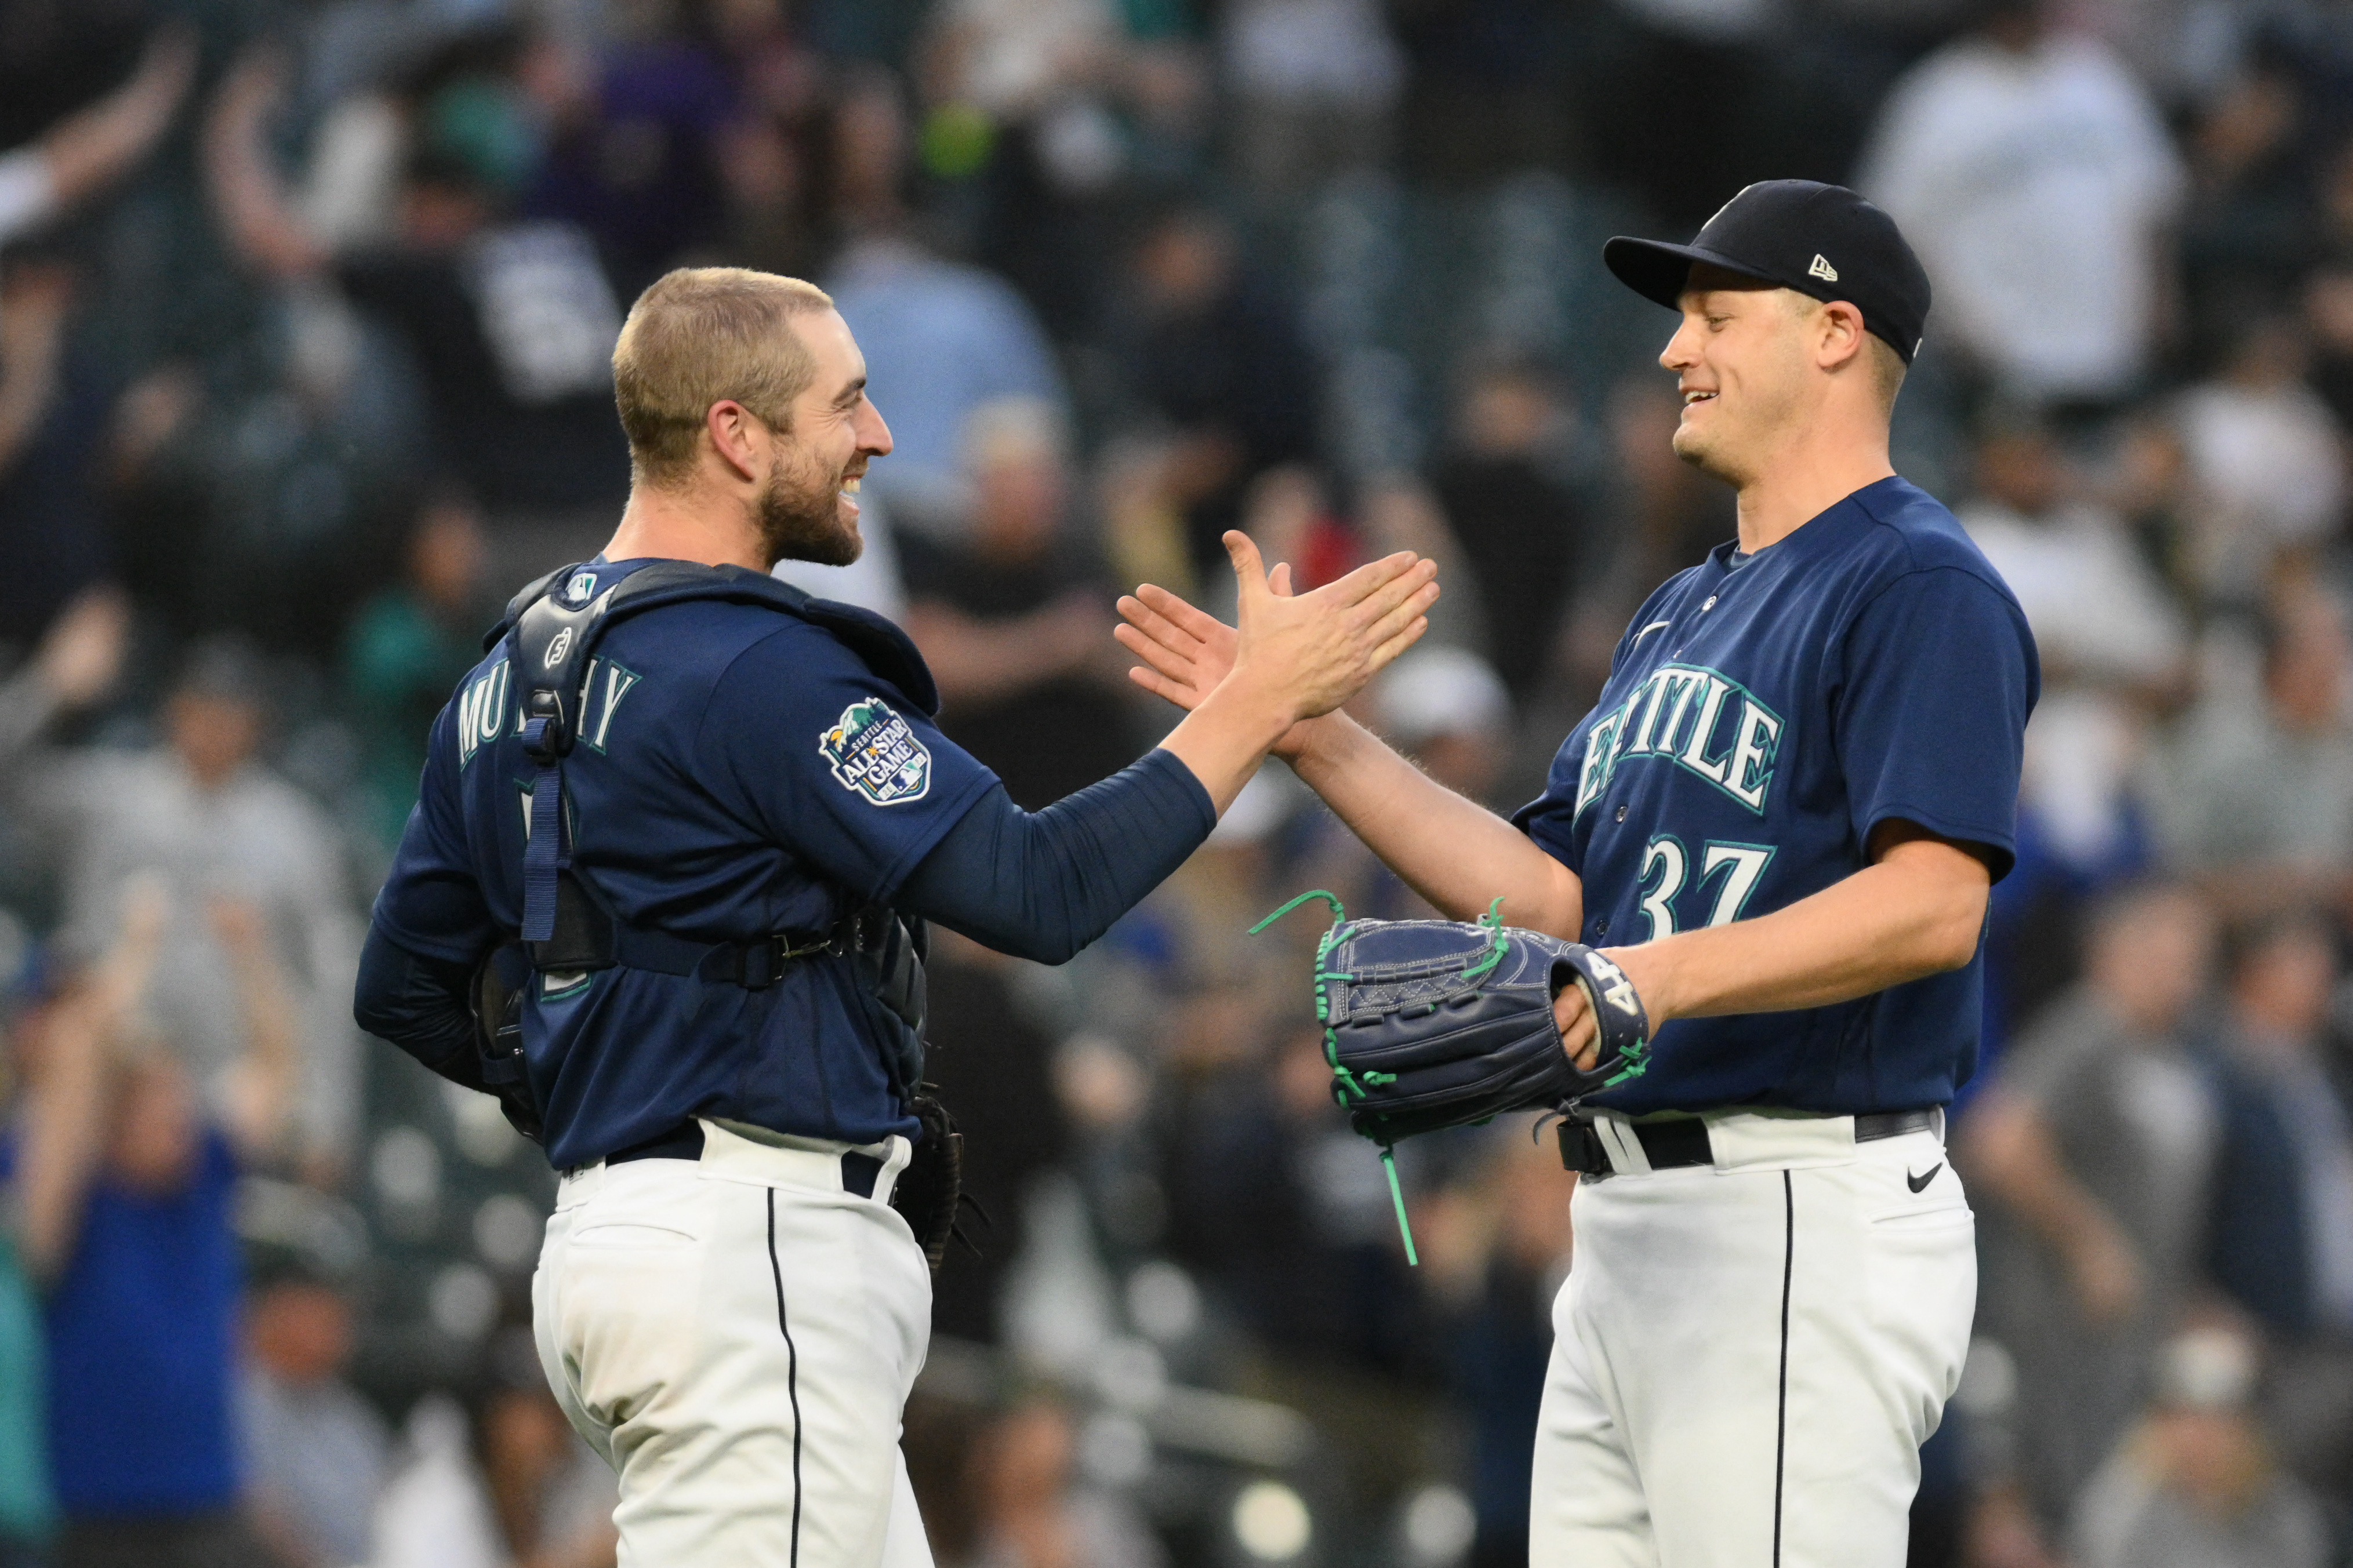 Ty France homers twice as Mariners finish sweep of A's